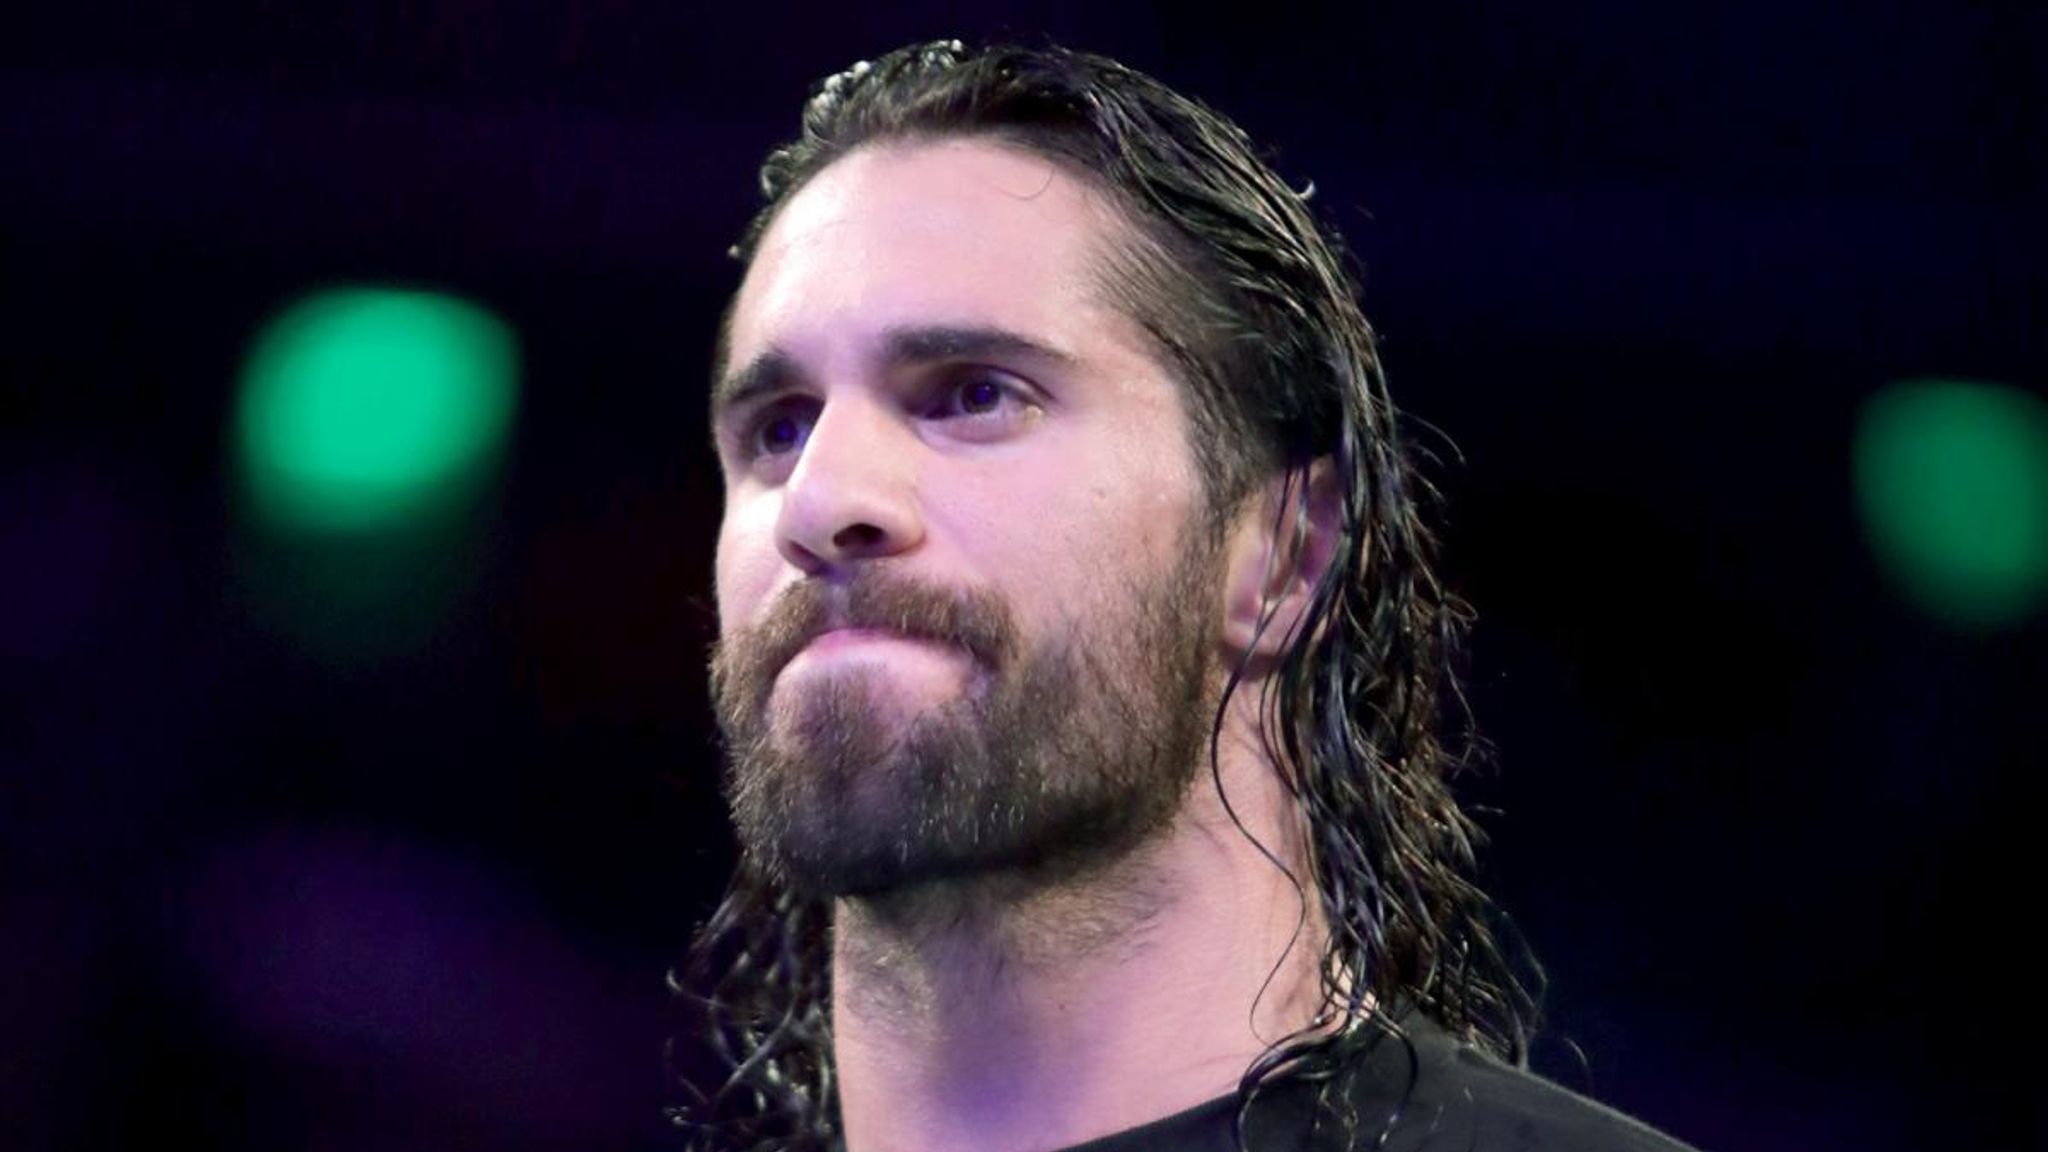 Seth Rollins reacts to Becky Lynch's hair being cut on RAW